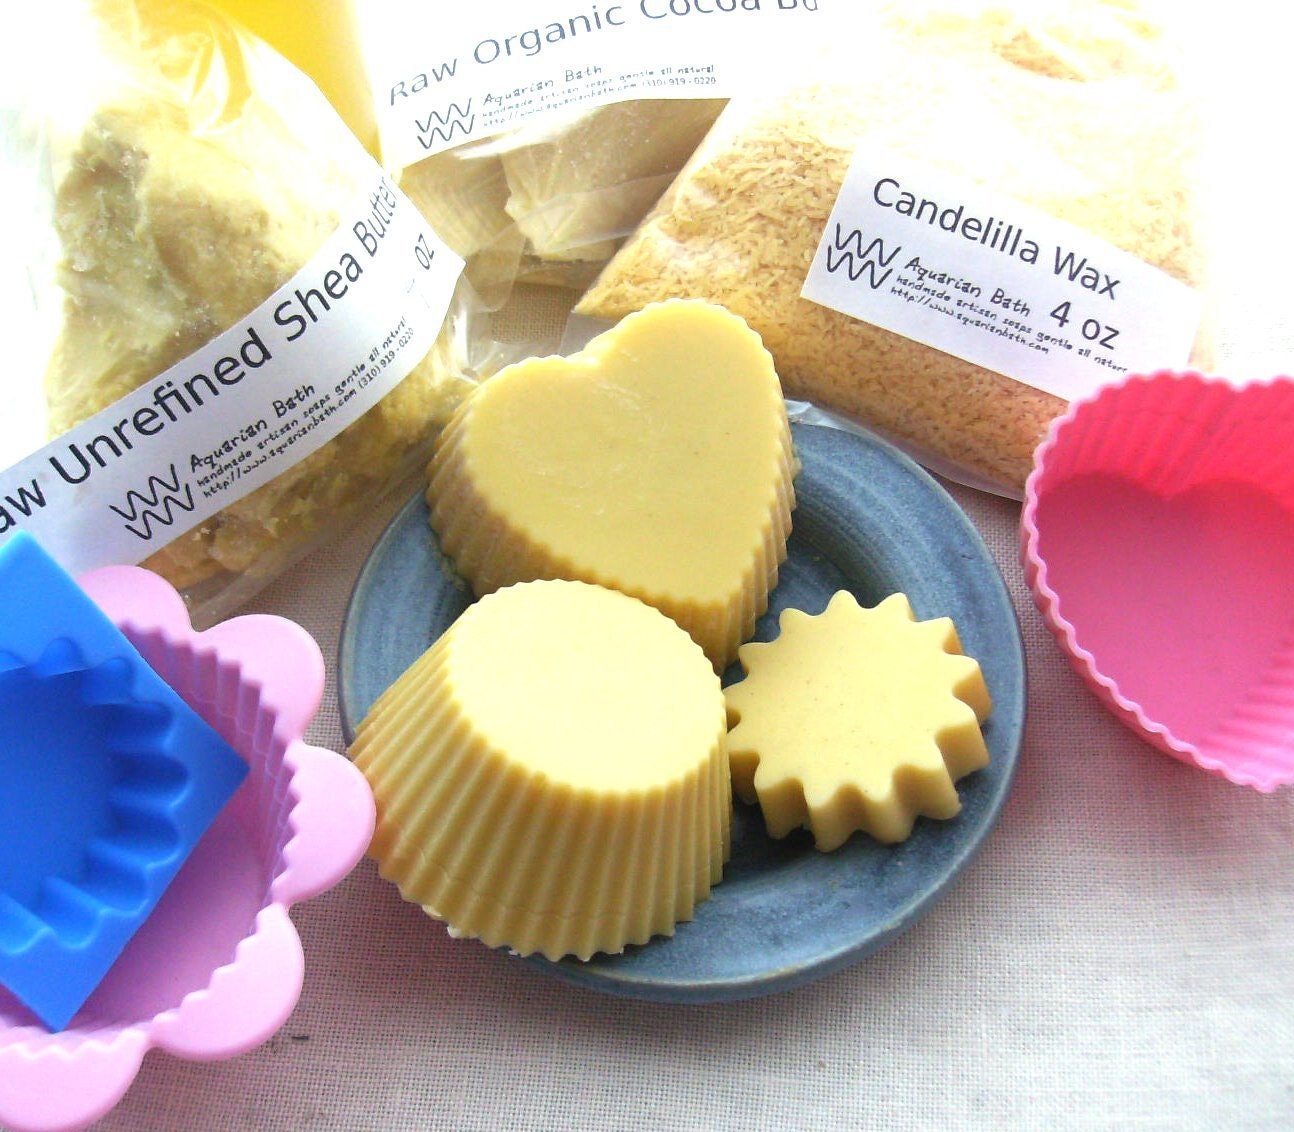 Lotion Bar Kit - Makes 12 Shea & Cocoa Butter Lotion Bars, Includes 3 Recipes - Kit - DIY Kit - Solid Lotion - Solid Lotion Bar